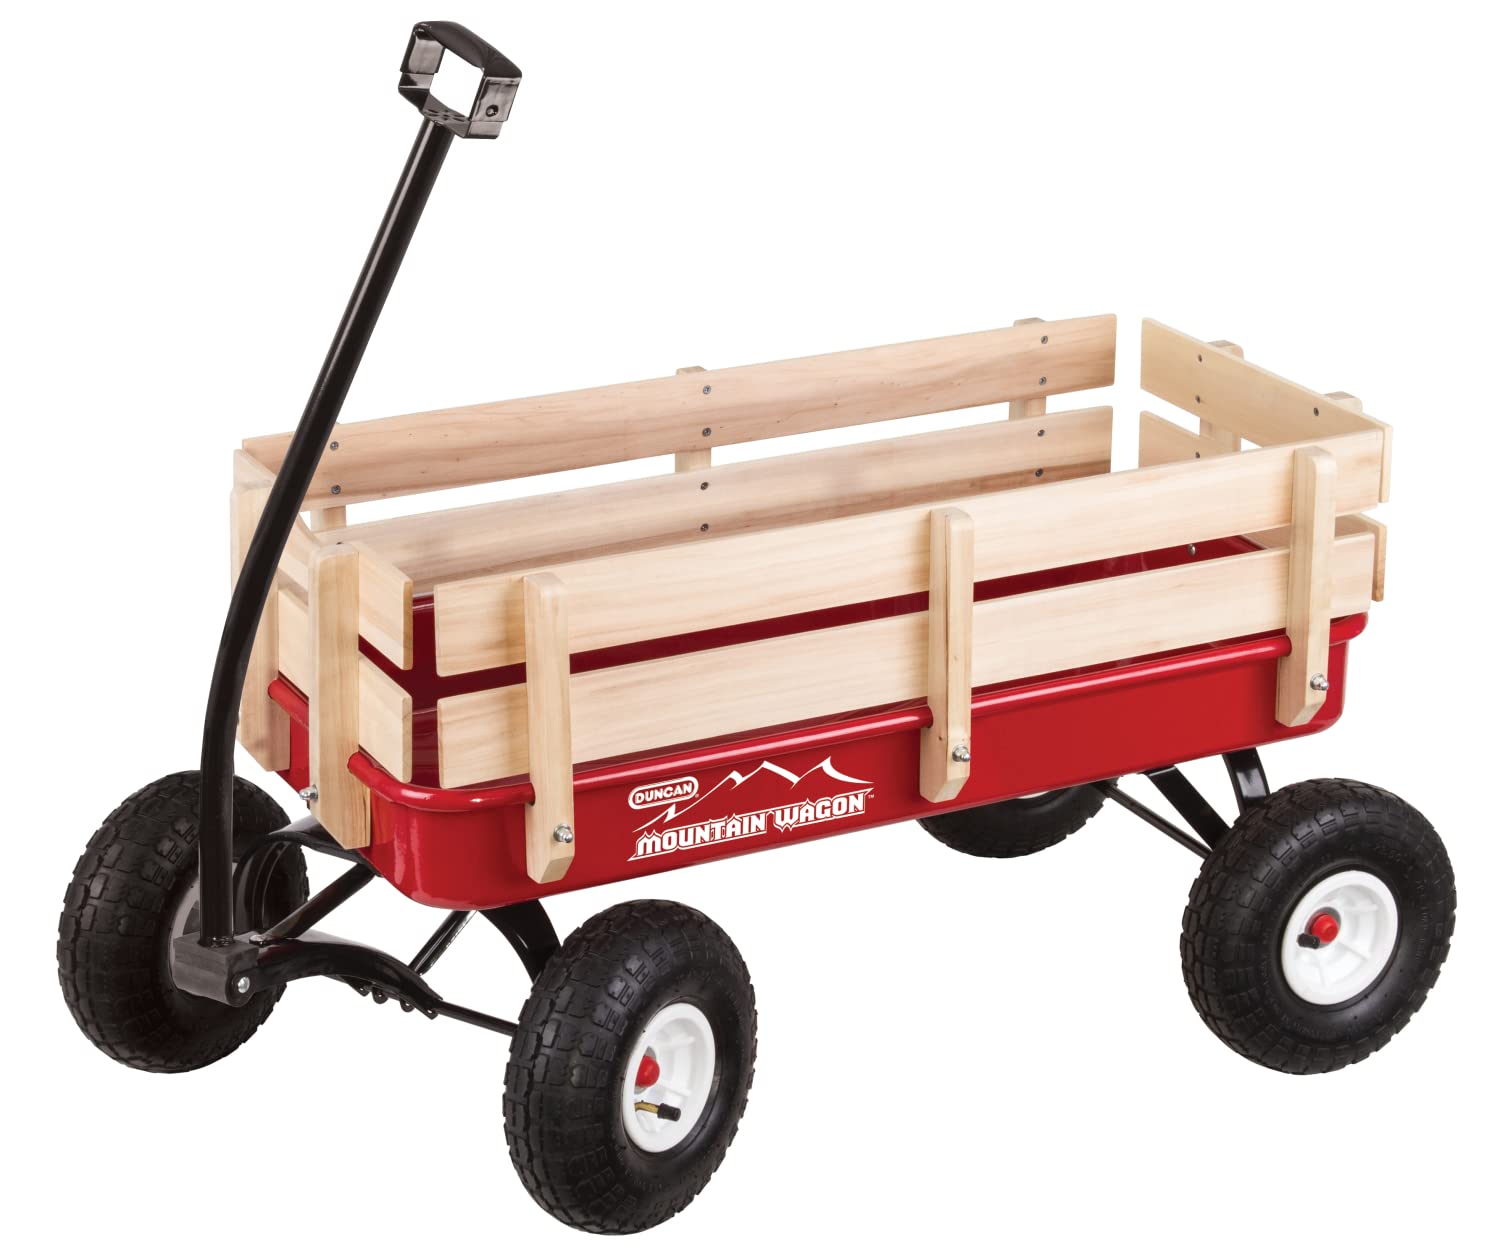 Duncan Mountain Wagon - Pull-Along Wagon for Kids with Wooden Panels, All Terrain Tires, Wide Grip Handle, Wide Wheel Base Red 41” x 22” x 38.5”